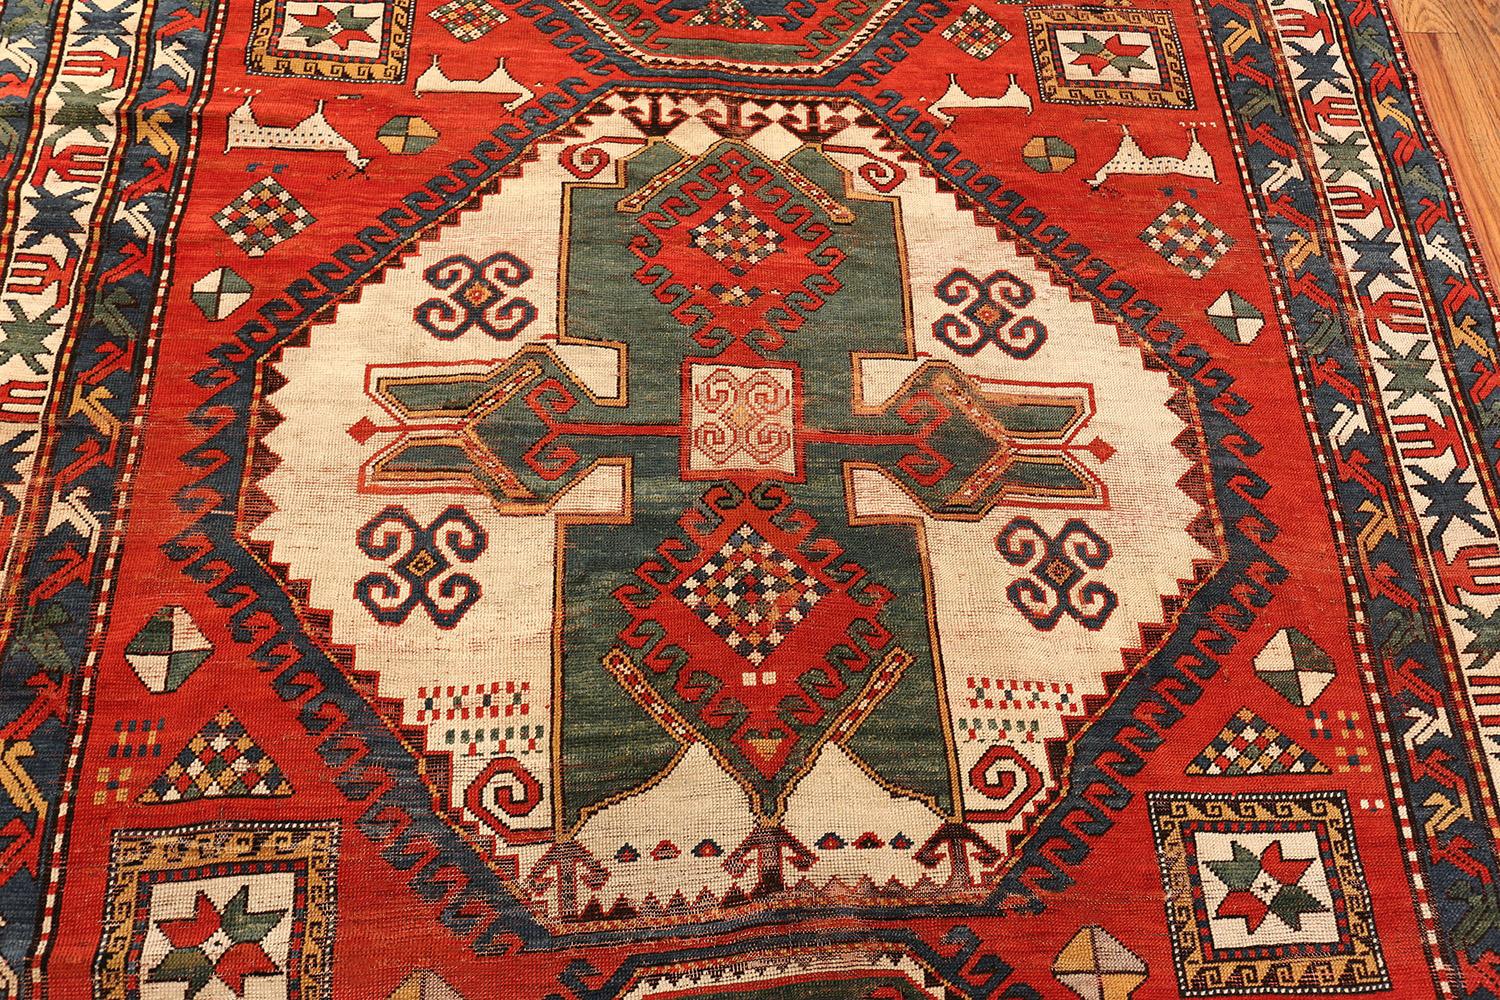 Hand-Knotted Tribal Antique Caucasian Kazak Rug. Size: 6 ft 7 in x 9 ft 2 in